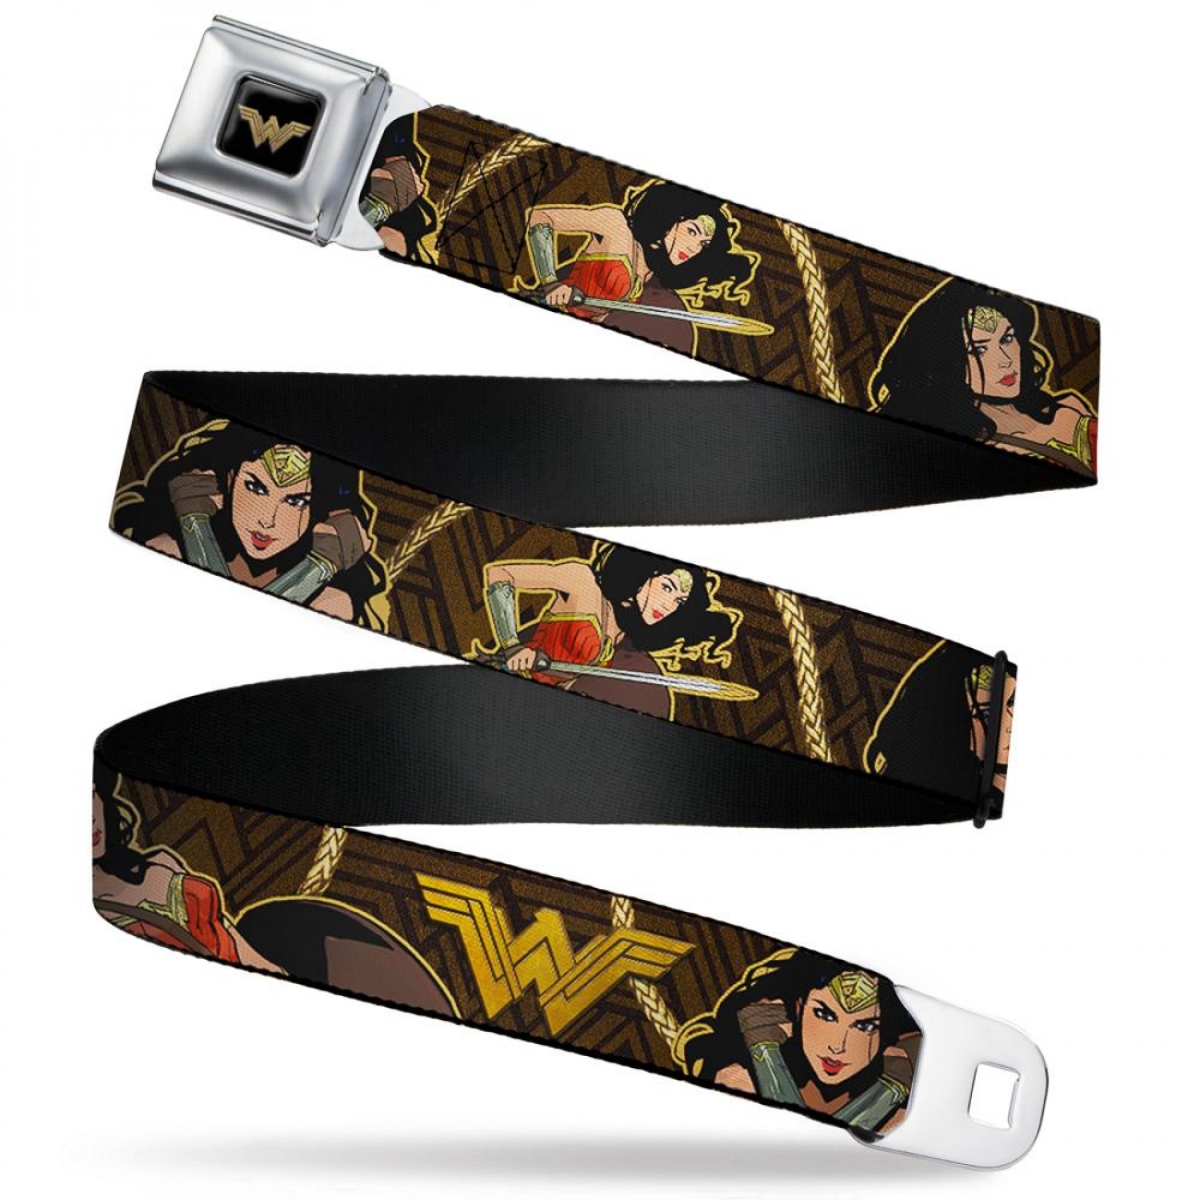 Picture of Wonder Woman 839306 Wonder Woman 2017 Icon with Lasso of Truth Seatbelt Belt